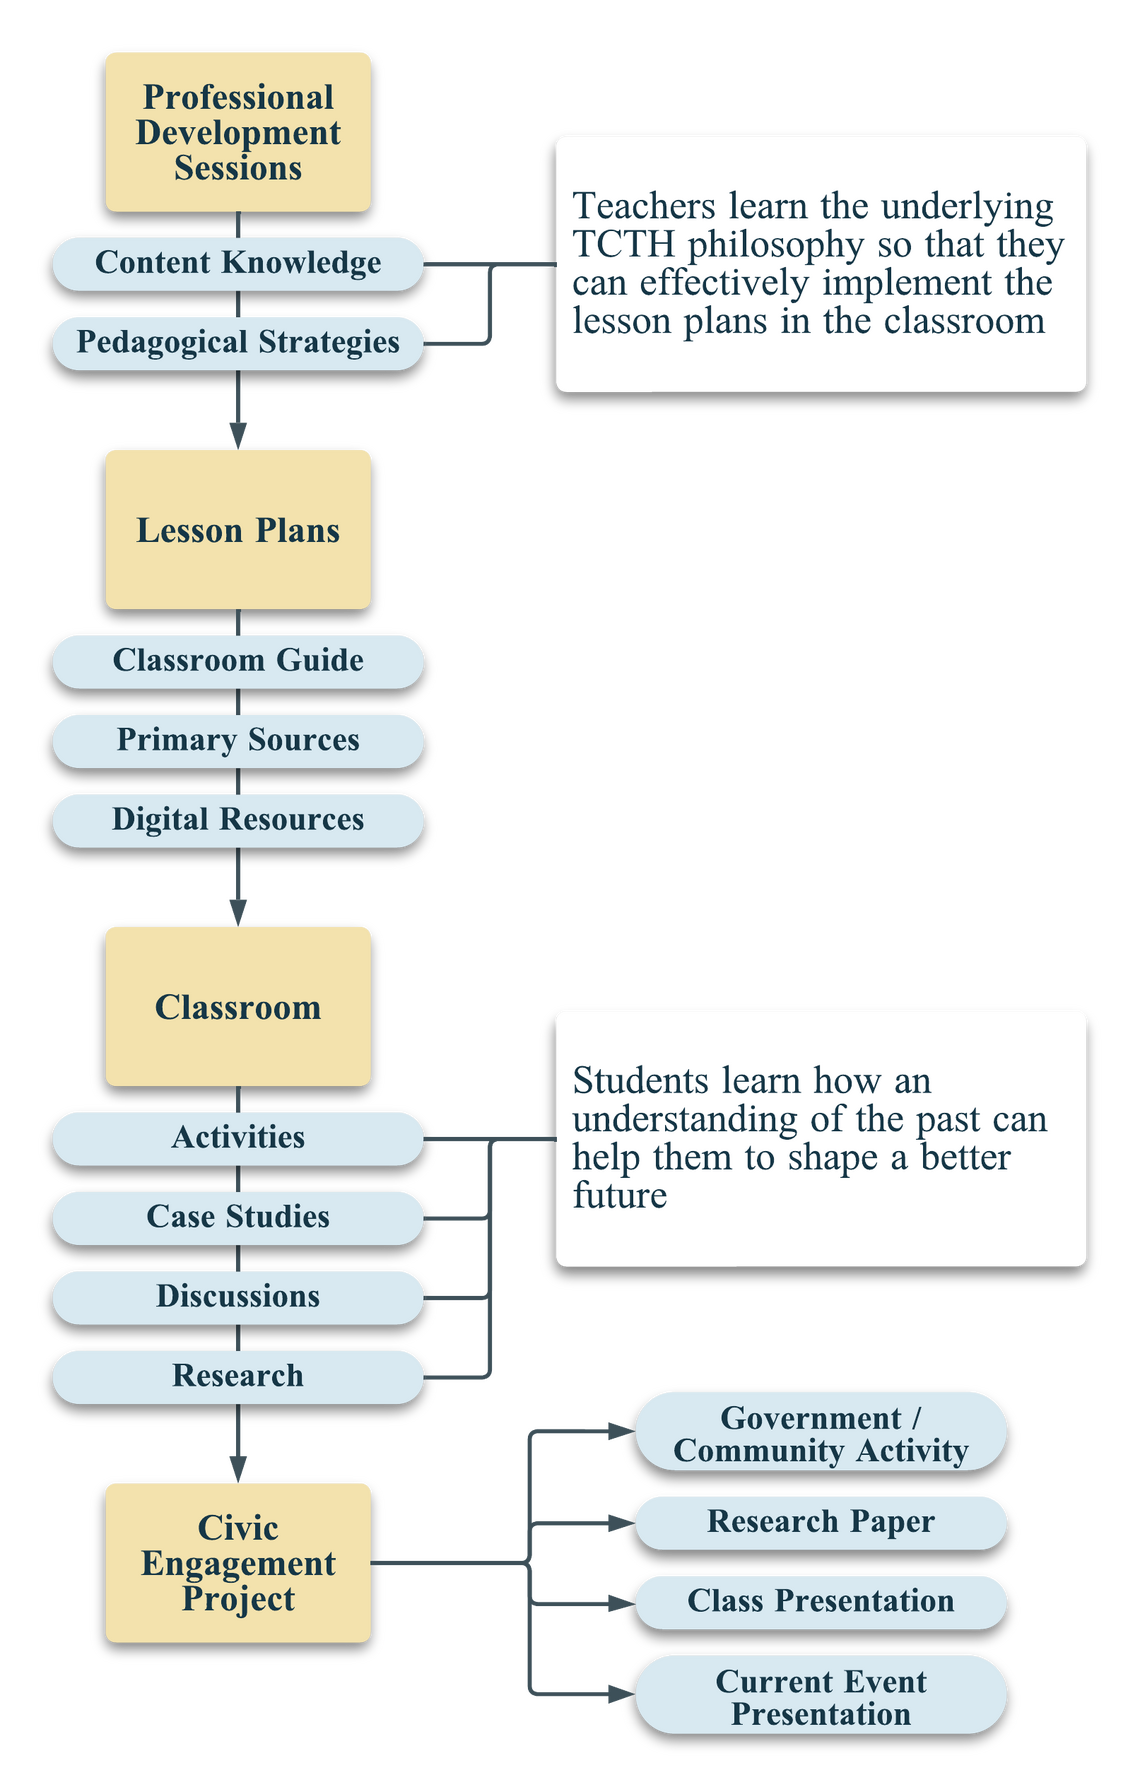 Chart documenting the flow of the TCTH program from the initial PD sessions for teachers to classroom implementation and the culminating civic engagement project